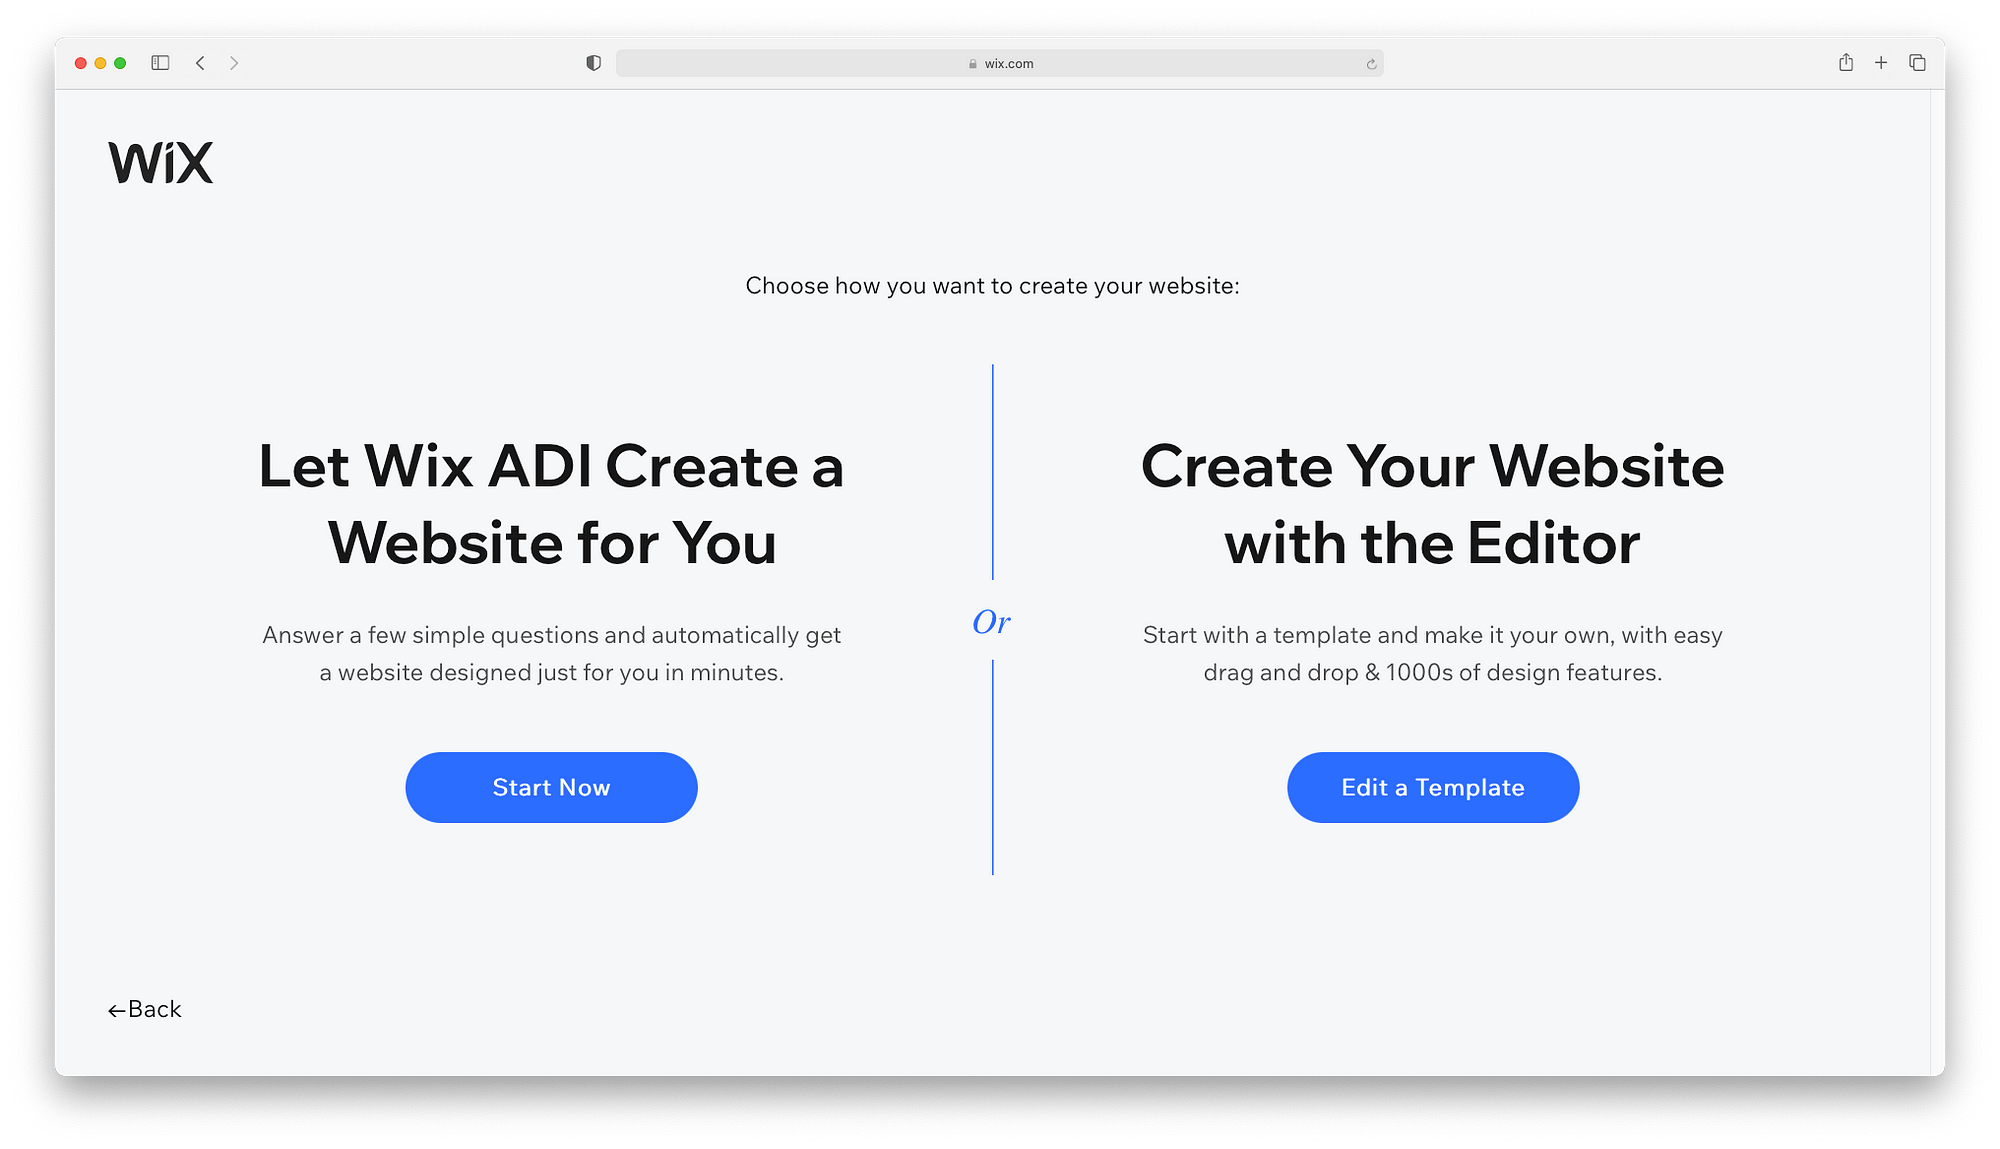 The choice between Wix ADI and Wix Editor